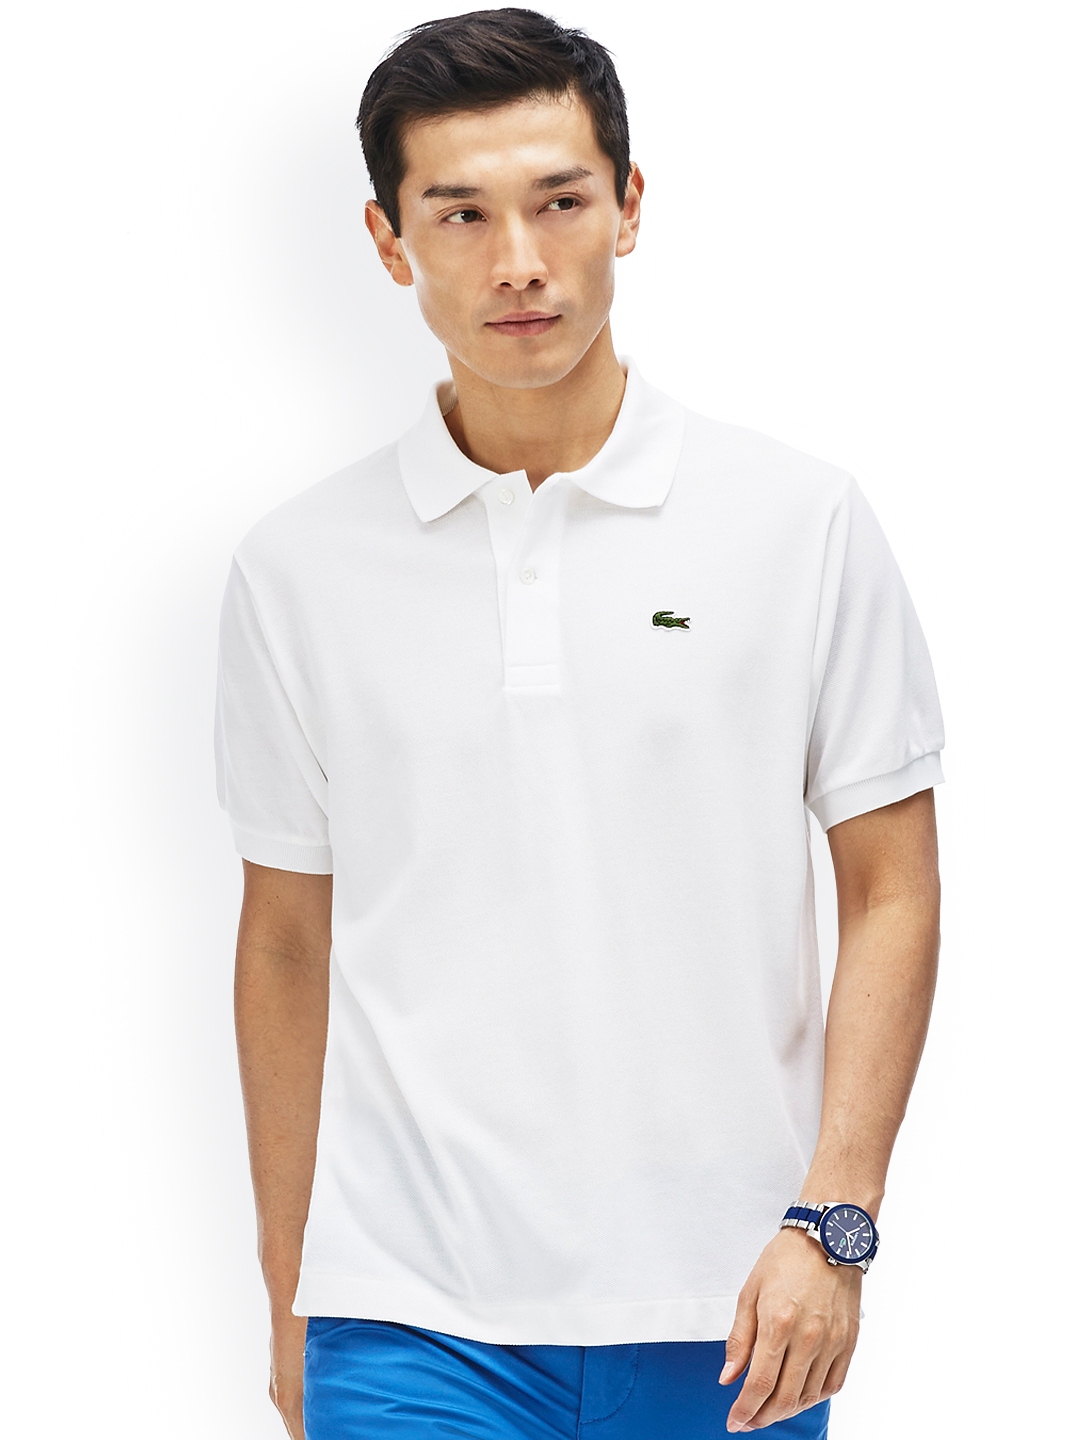 Buy Lacoste White Classic Fit L.12.12 - Tshirts for 1990139 | Myntra